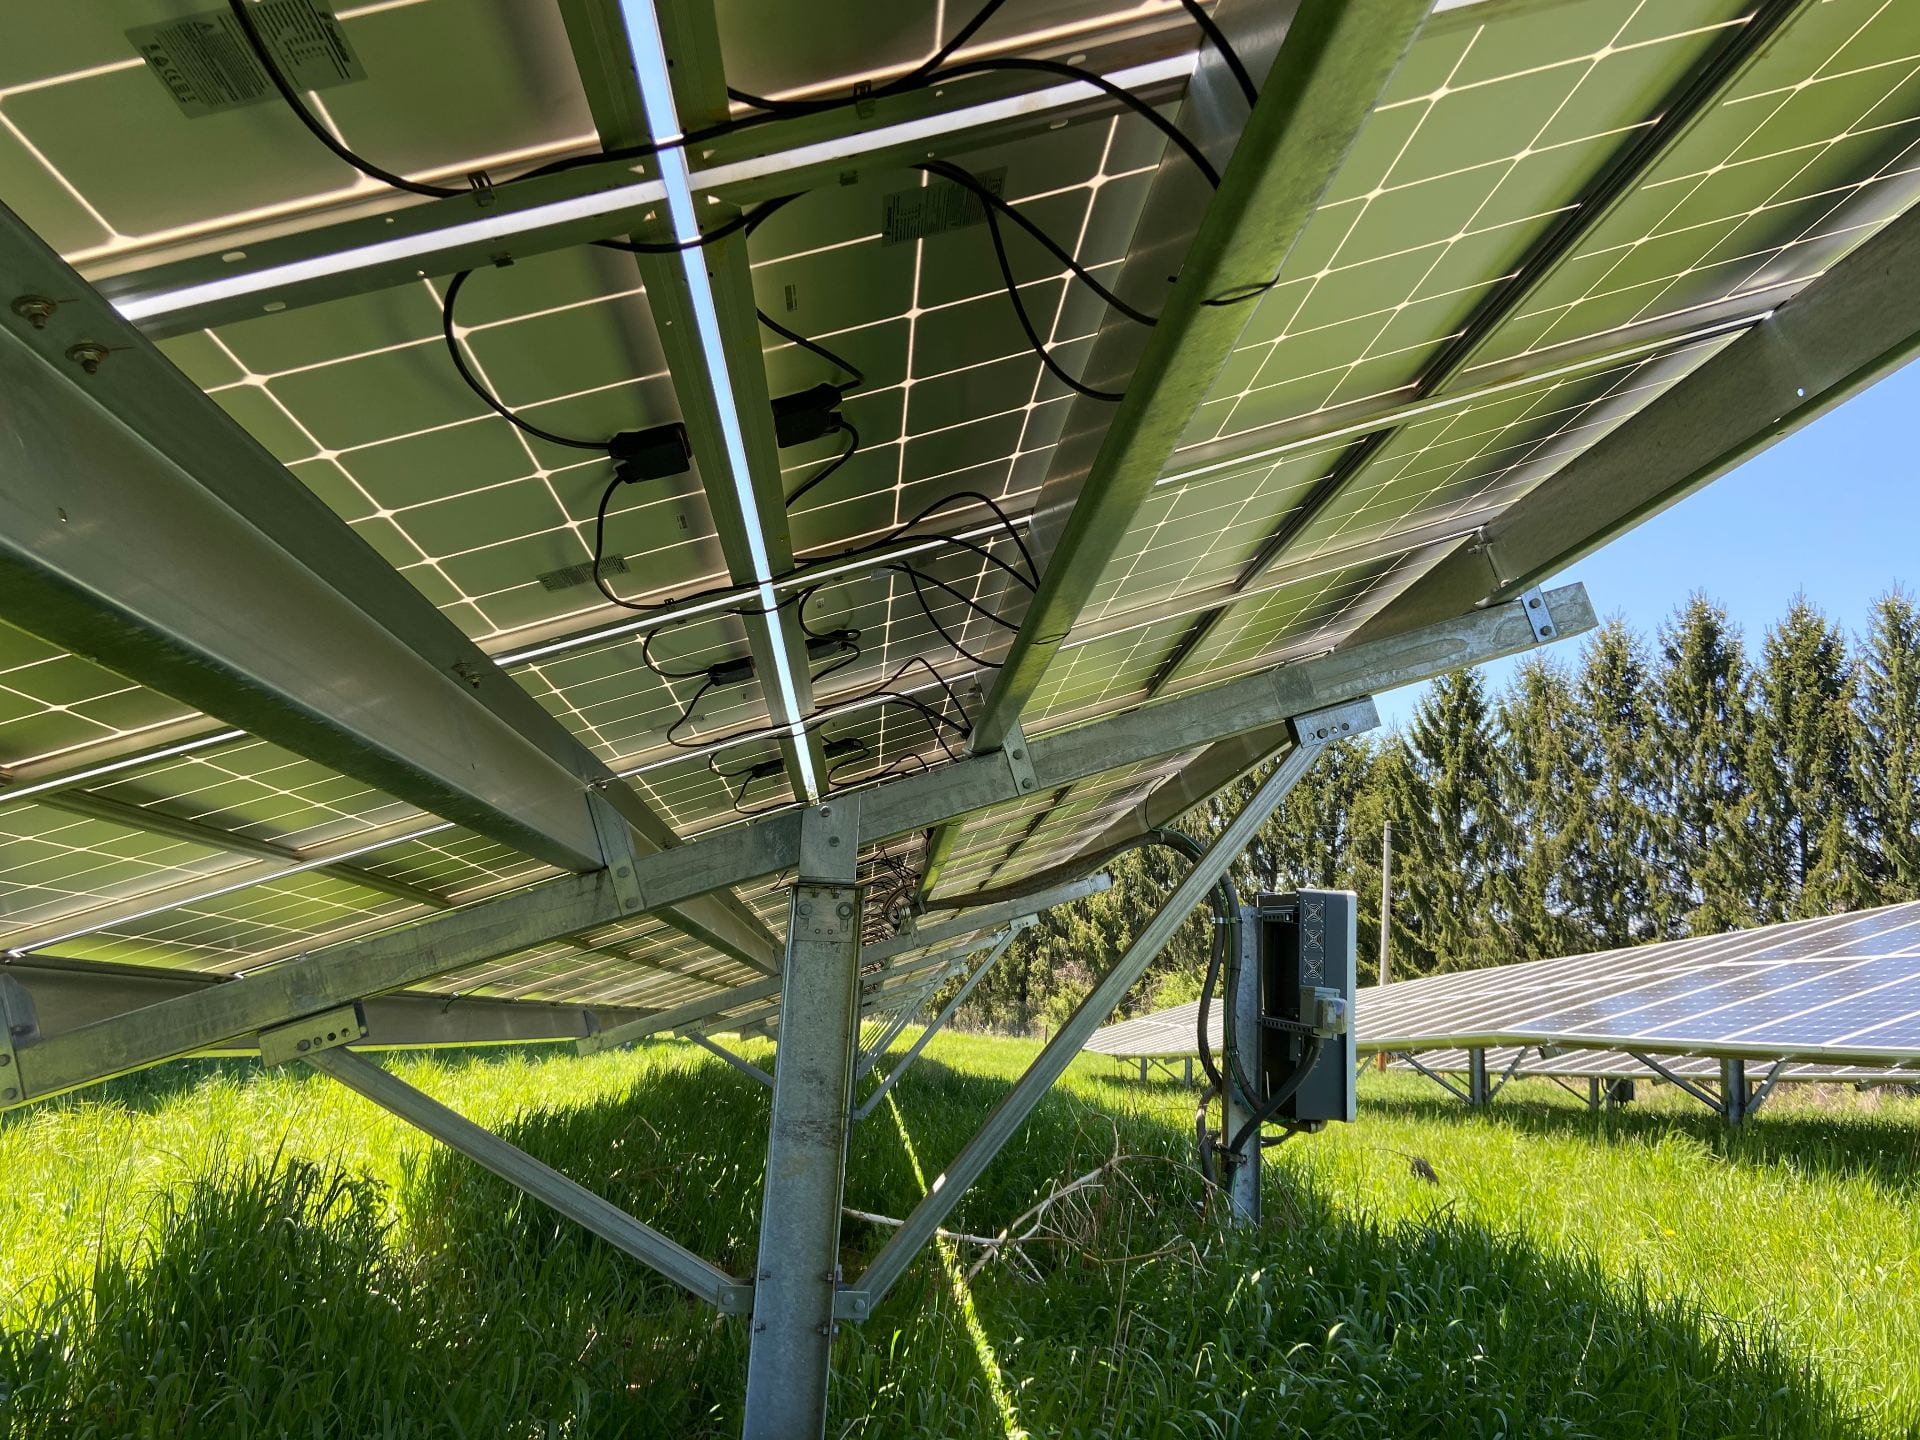 Solar panels are wired together and the current generated passes through an inverter (box on pole on right). Credit: Penn State MCOR